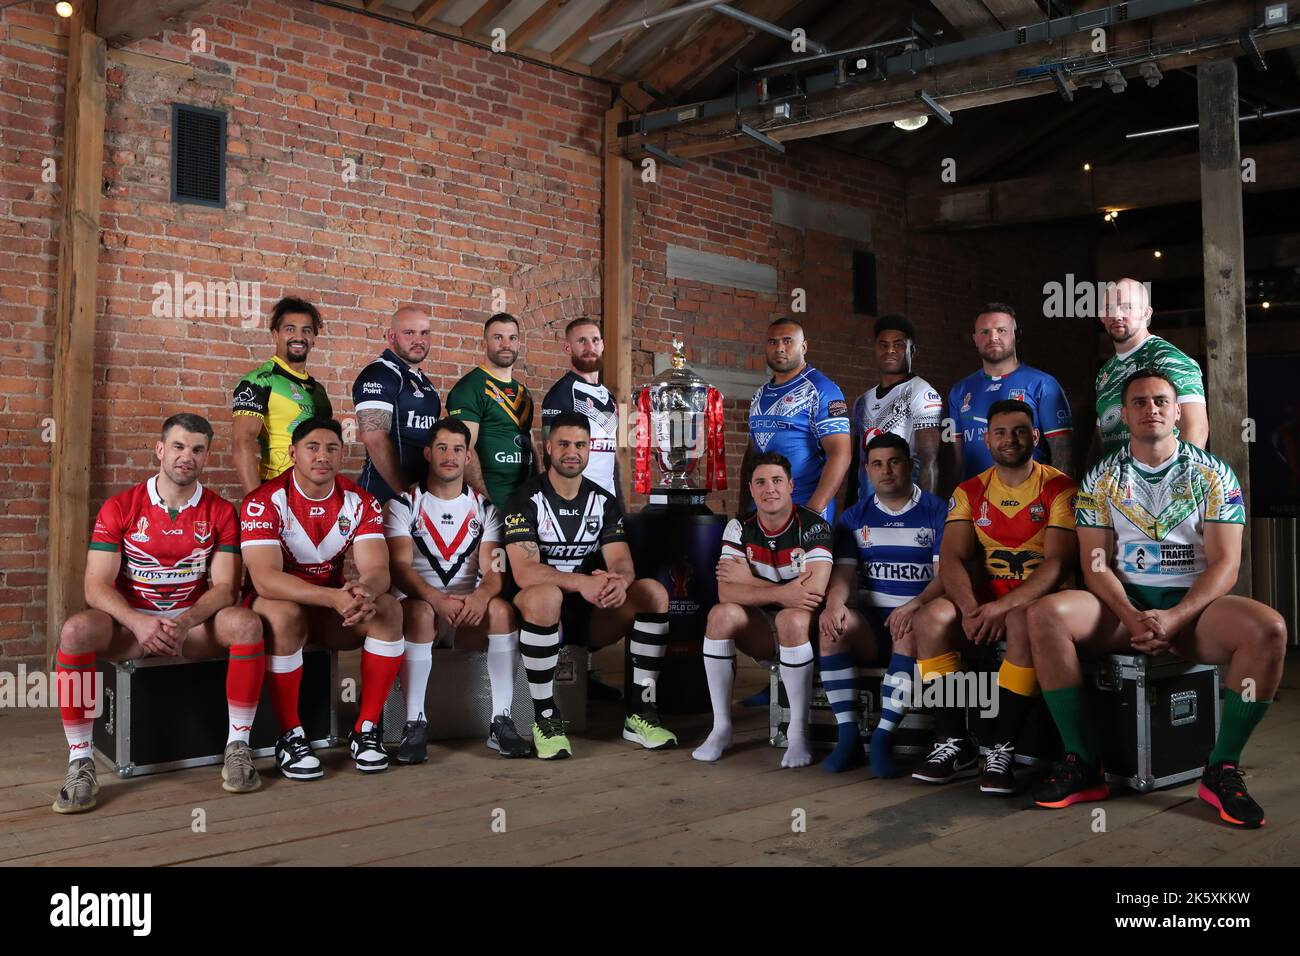 Science and Industry Museum, Liverpool Road, Manchester, 10th October 2022. Rugby League World Cup 2021 Tournament Launch (Back Row L-R) Ashton Golding of Jamaica, Dale Ferguson of Scotland, James Tedesco of Australia, Sam Tomkins of England, Junior Paulo of Samoa, Kevin Naiqama of Fiji, Nathan Brown of Italy, George King of Ireland (Front Row L-R) Elliot Kear of Wales, Jason Taumalolo of Tonga, Benjamin Garcia of France, Jesse Bromwich of New Zealand, Mitchell Moses of Lebanon, Jordan Meads of Greece, Rhyse Martin of Papua New Guinea and Brad Takairangi of Cook Islands pose for a photograp Stock Photo